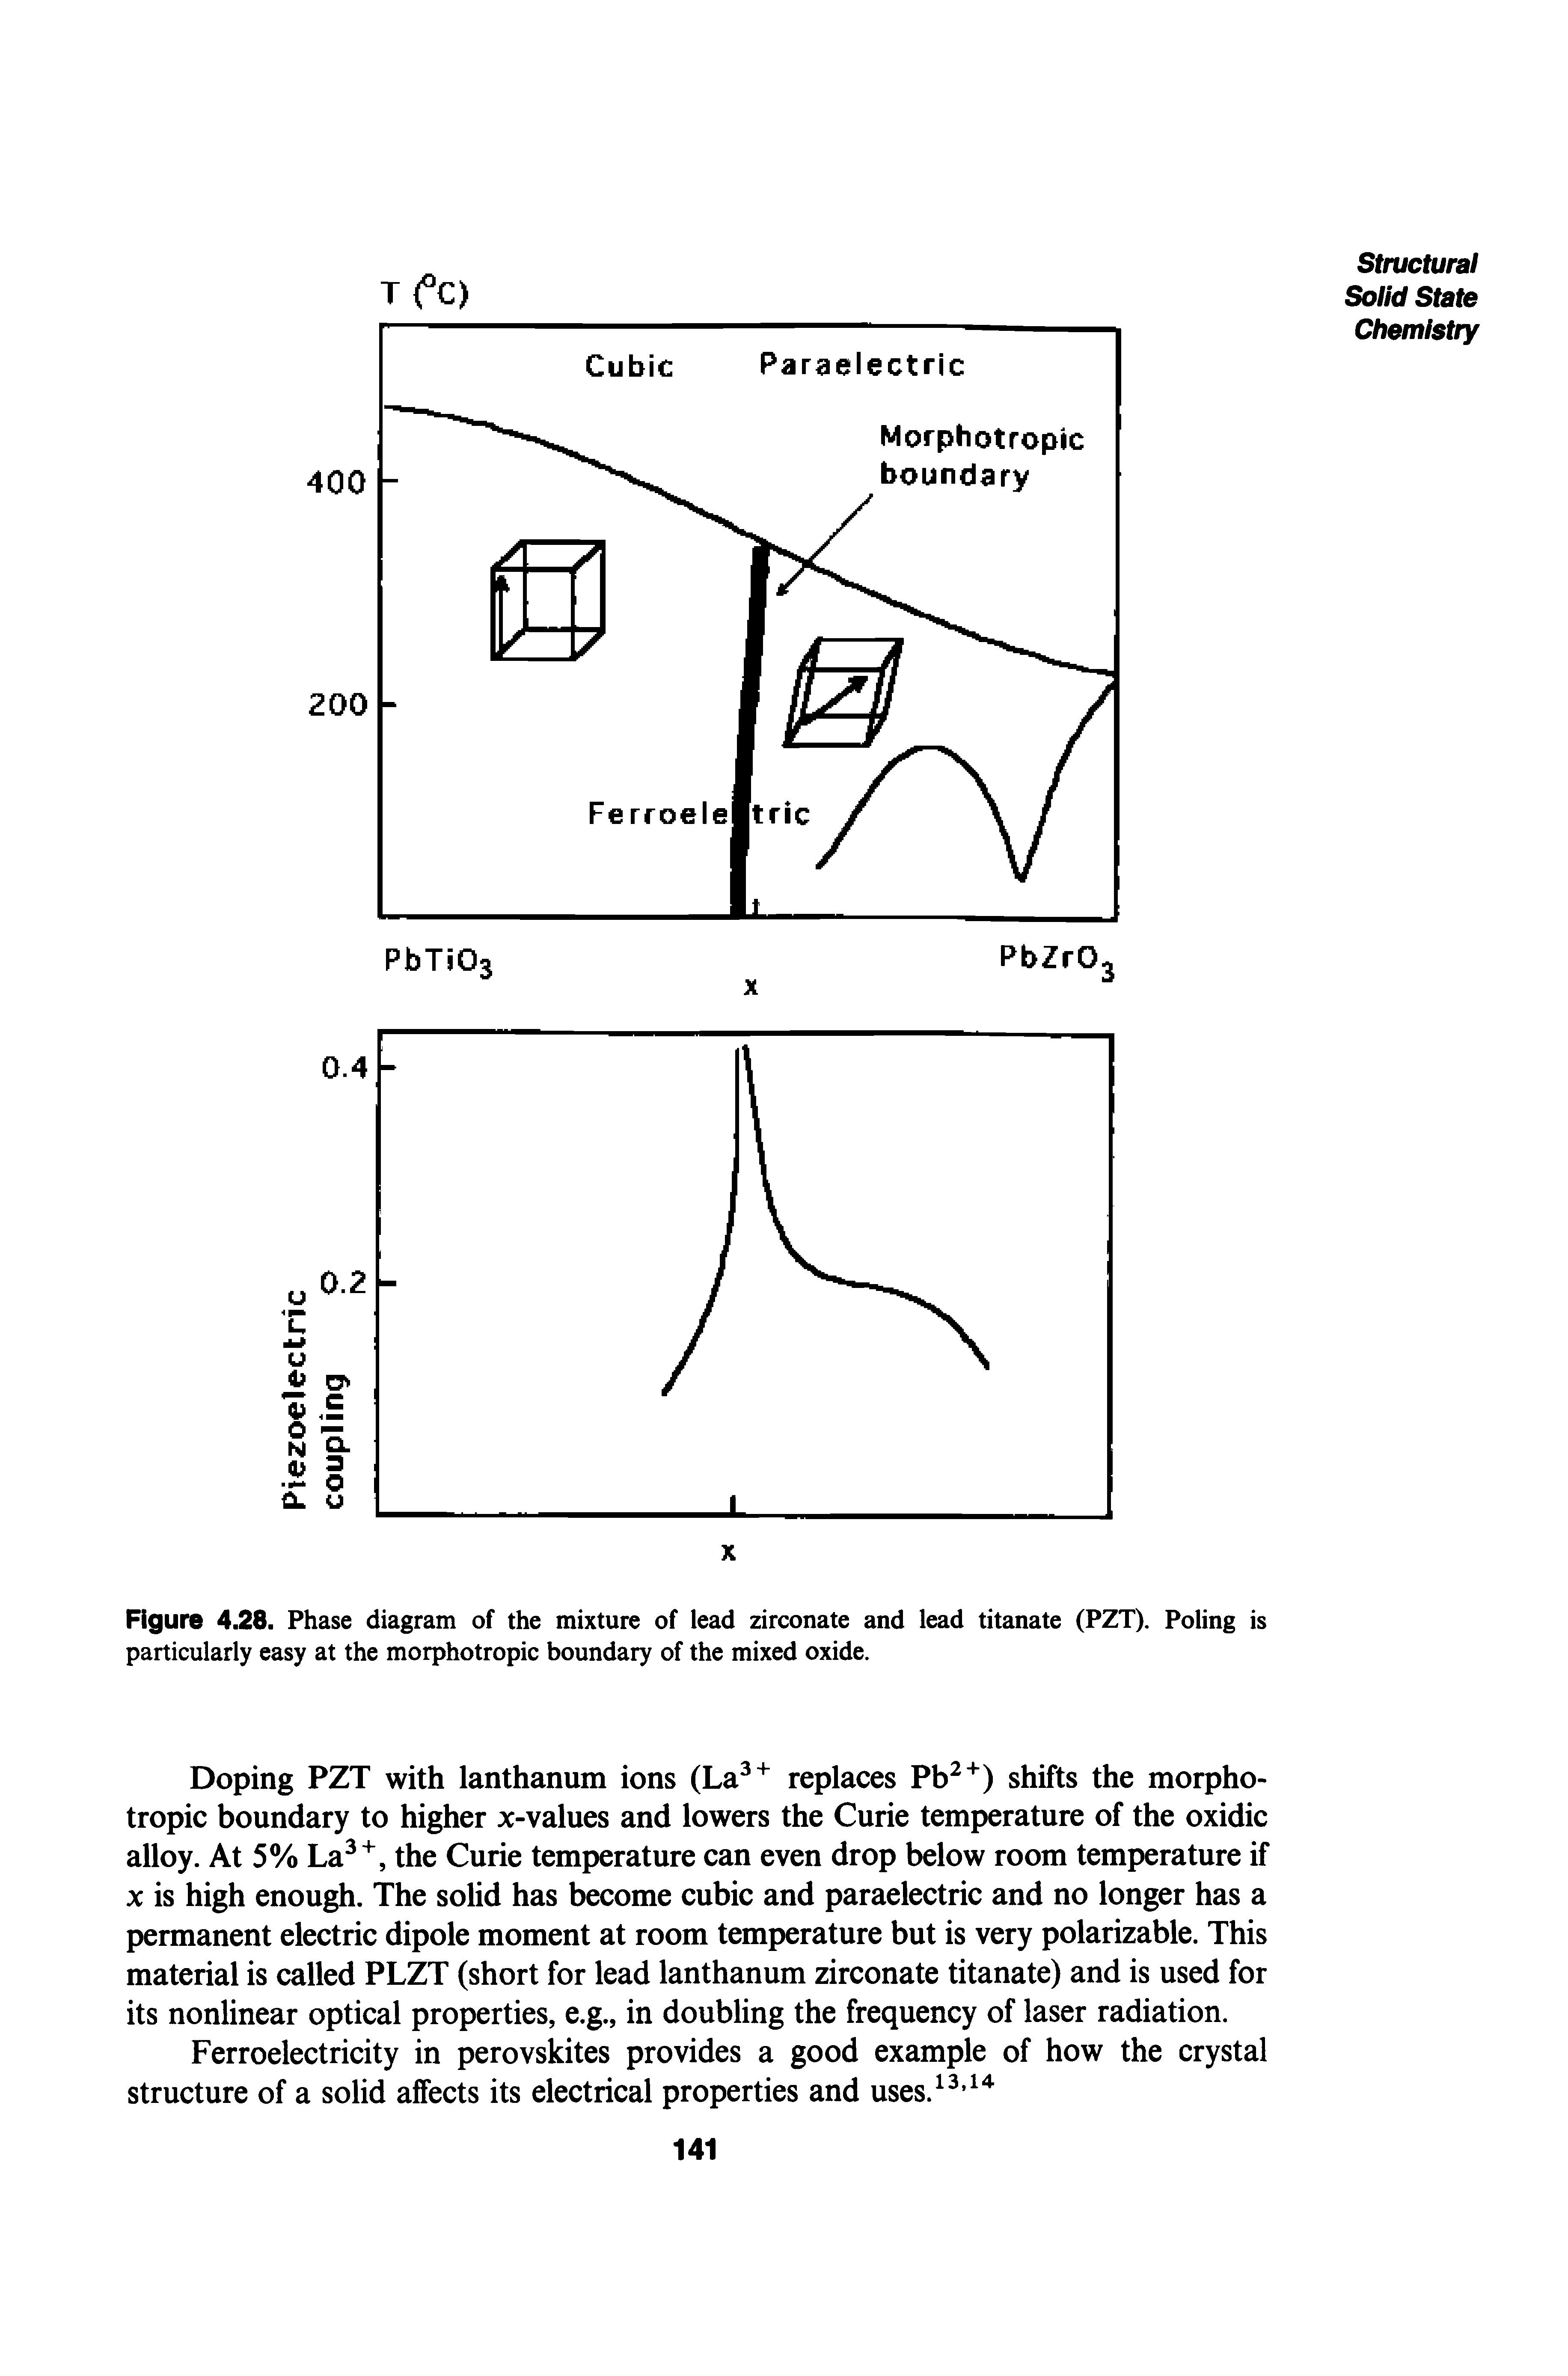 Figure 4.28. Phase diagram of the mixture of lead zirconate and lead titanate (PZT). Poling is particularly easy at the morphotropic boundary of the mixed oxide.